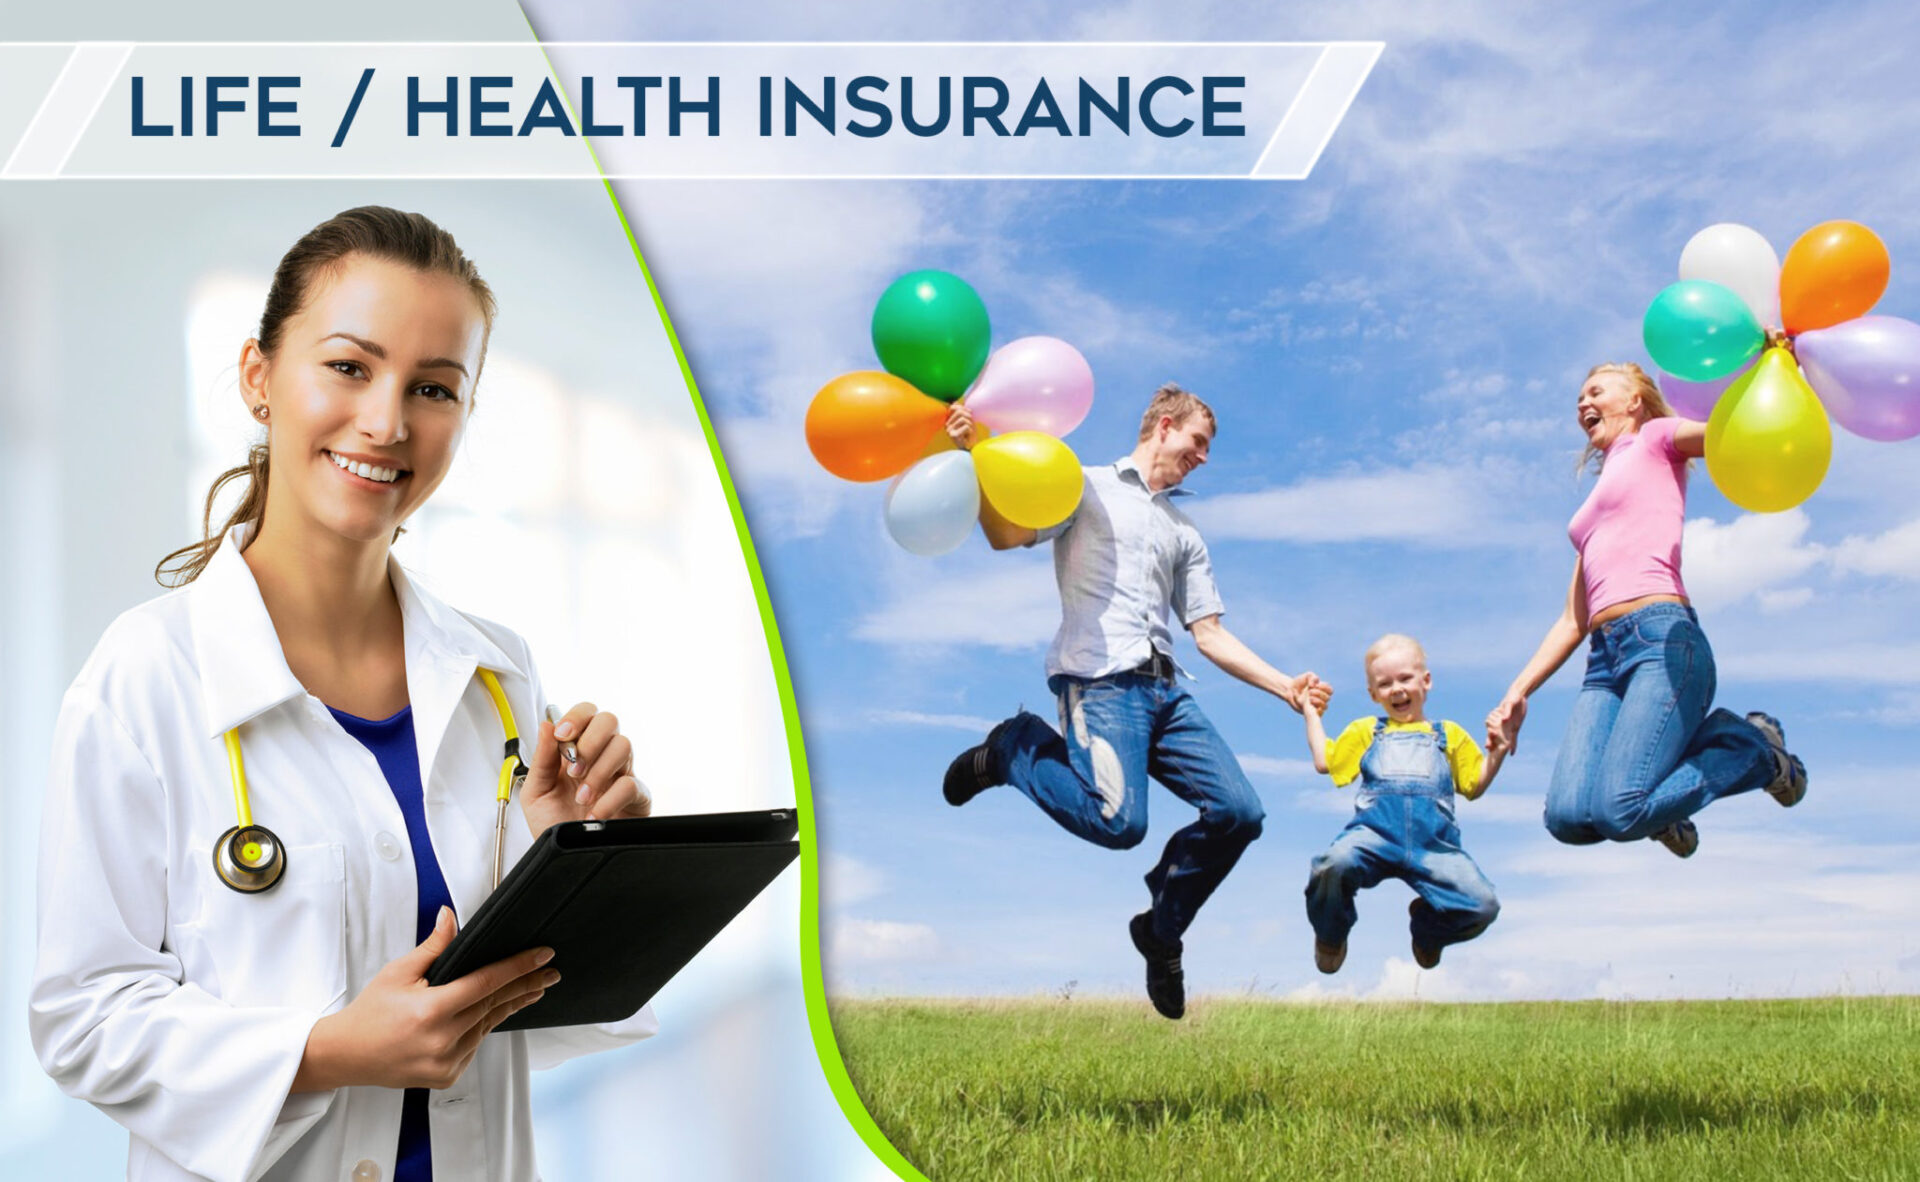 Life and Health Insurance Image